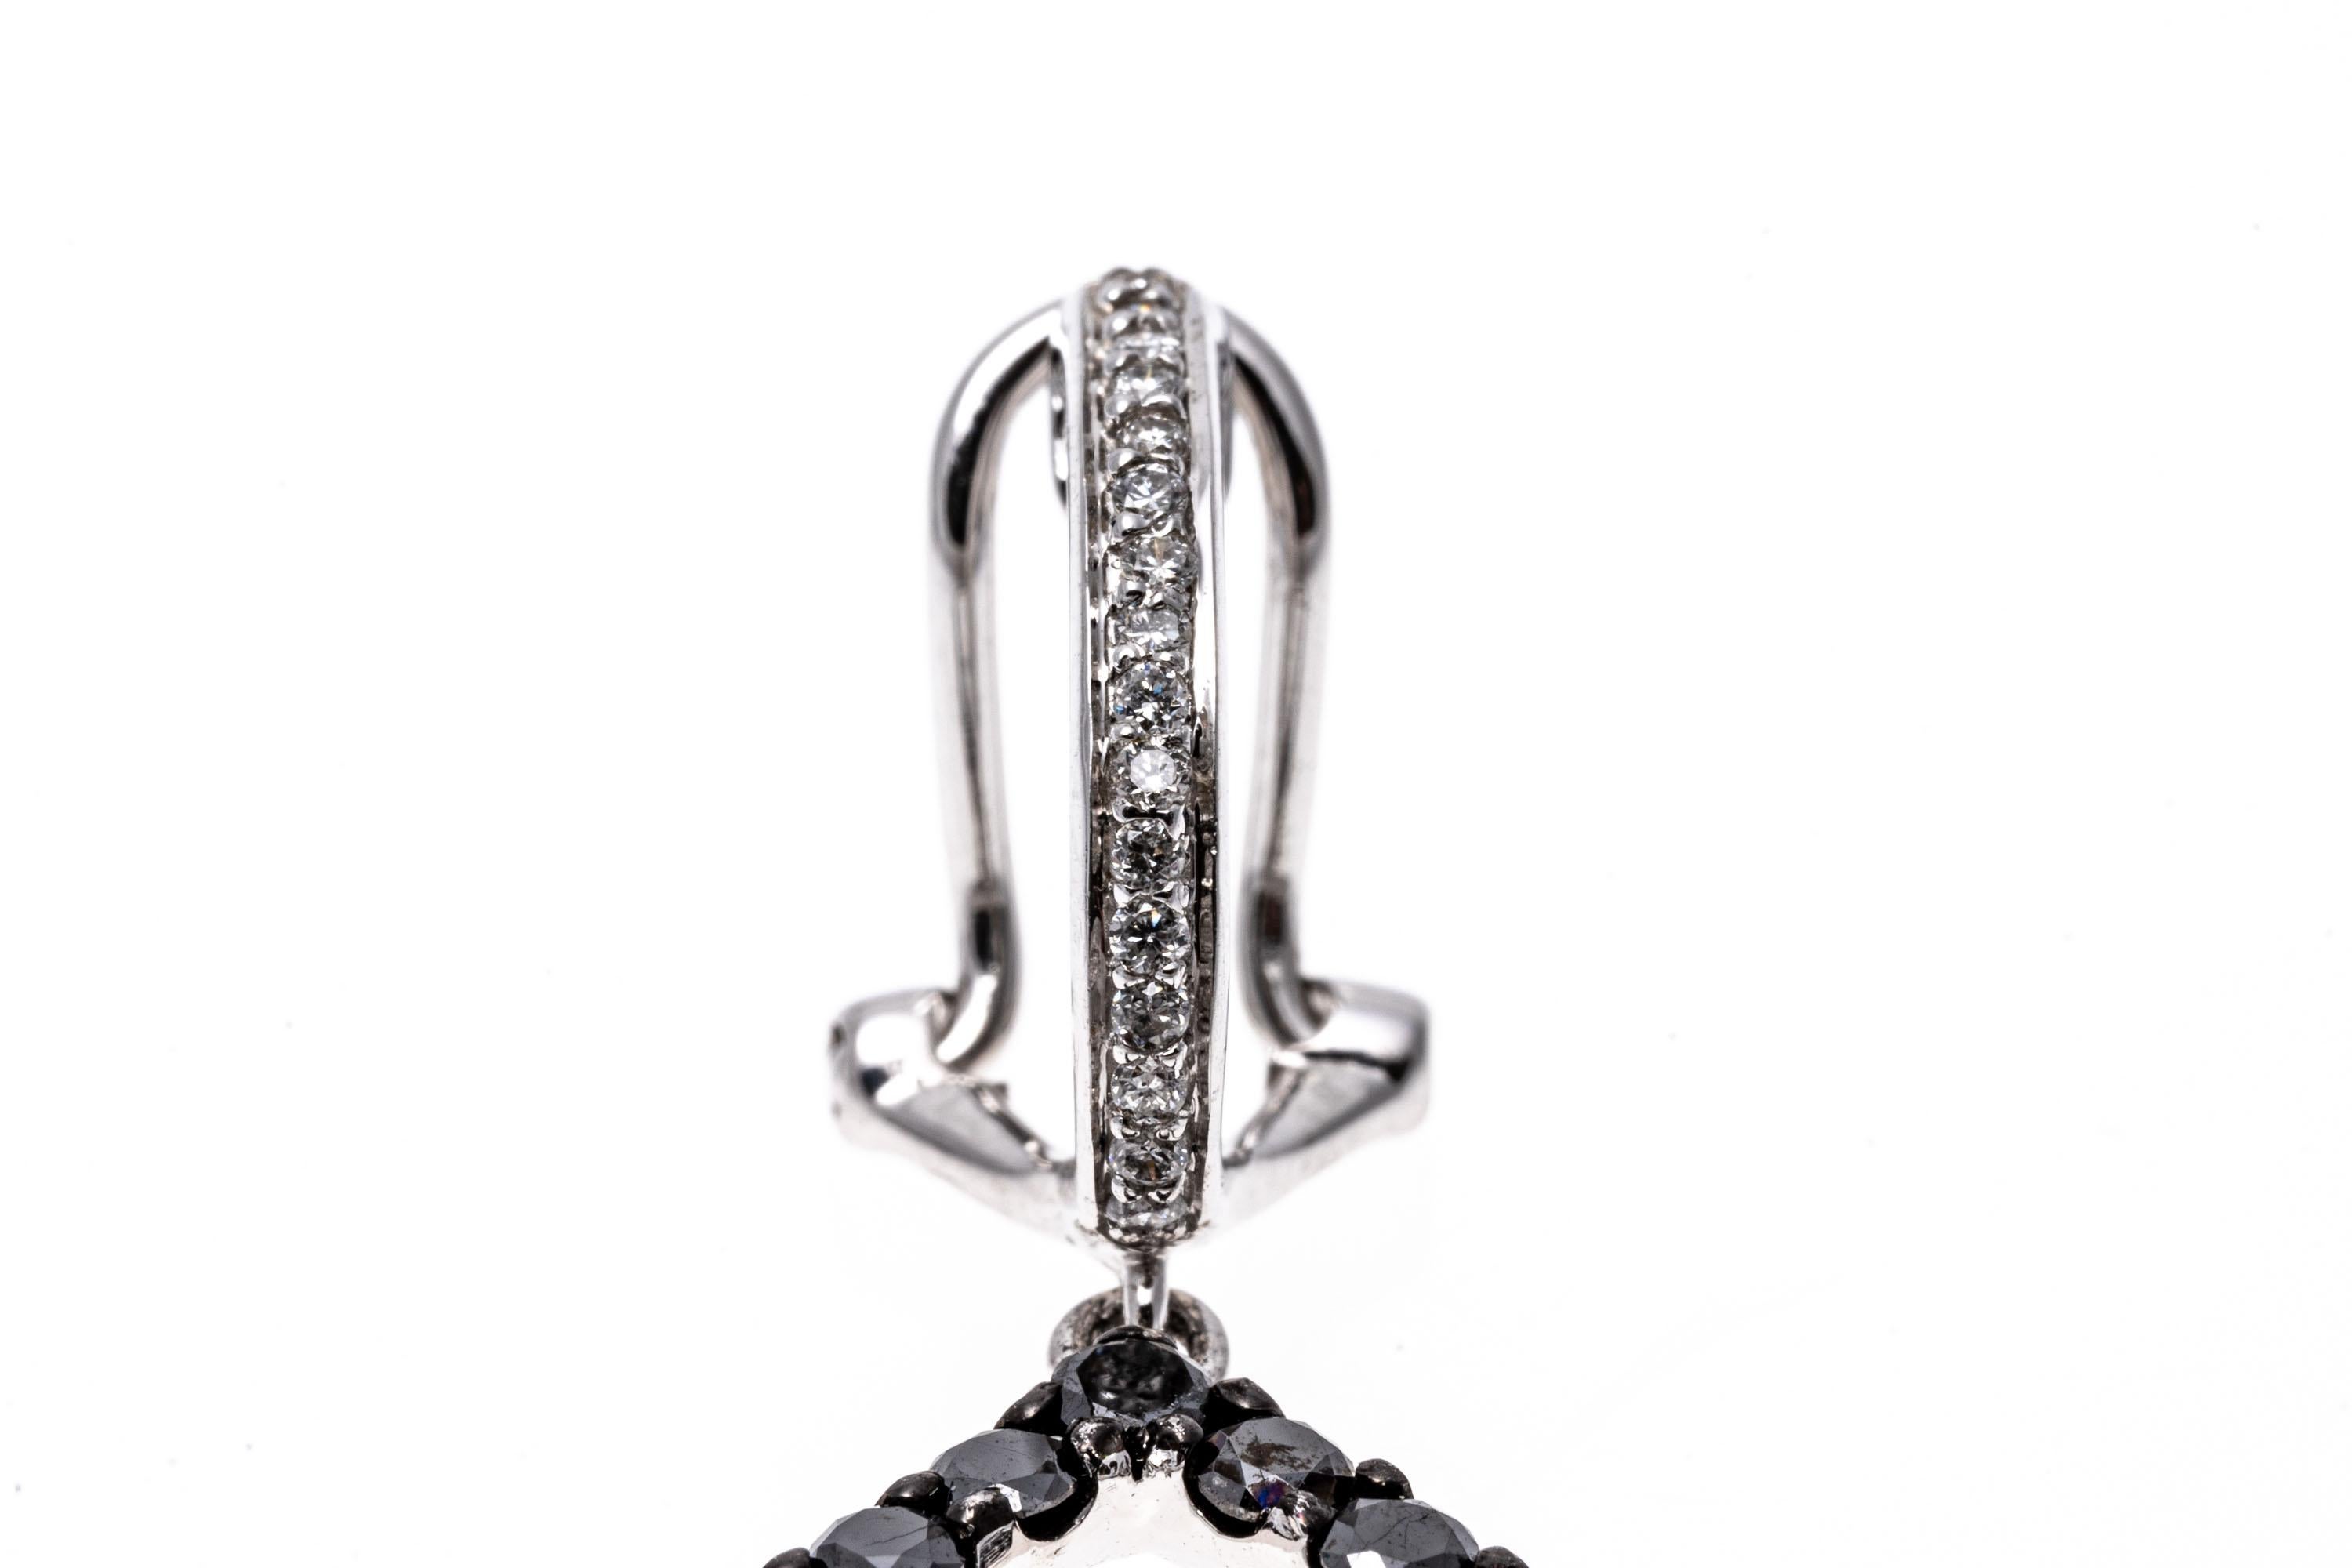 14k white gold earrings. These beautiful earrings contain a small hoop top, set with a row of round faceted, white diamonds. Suspended from the hoop is a pear shaped open drop style pendant trimmed with round faceted, black diamonds, prong set. The